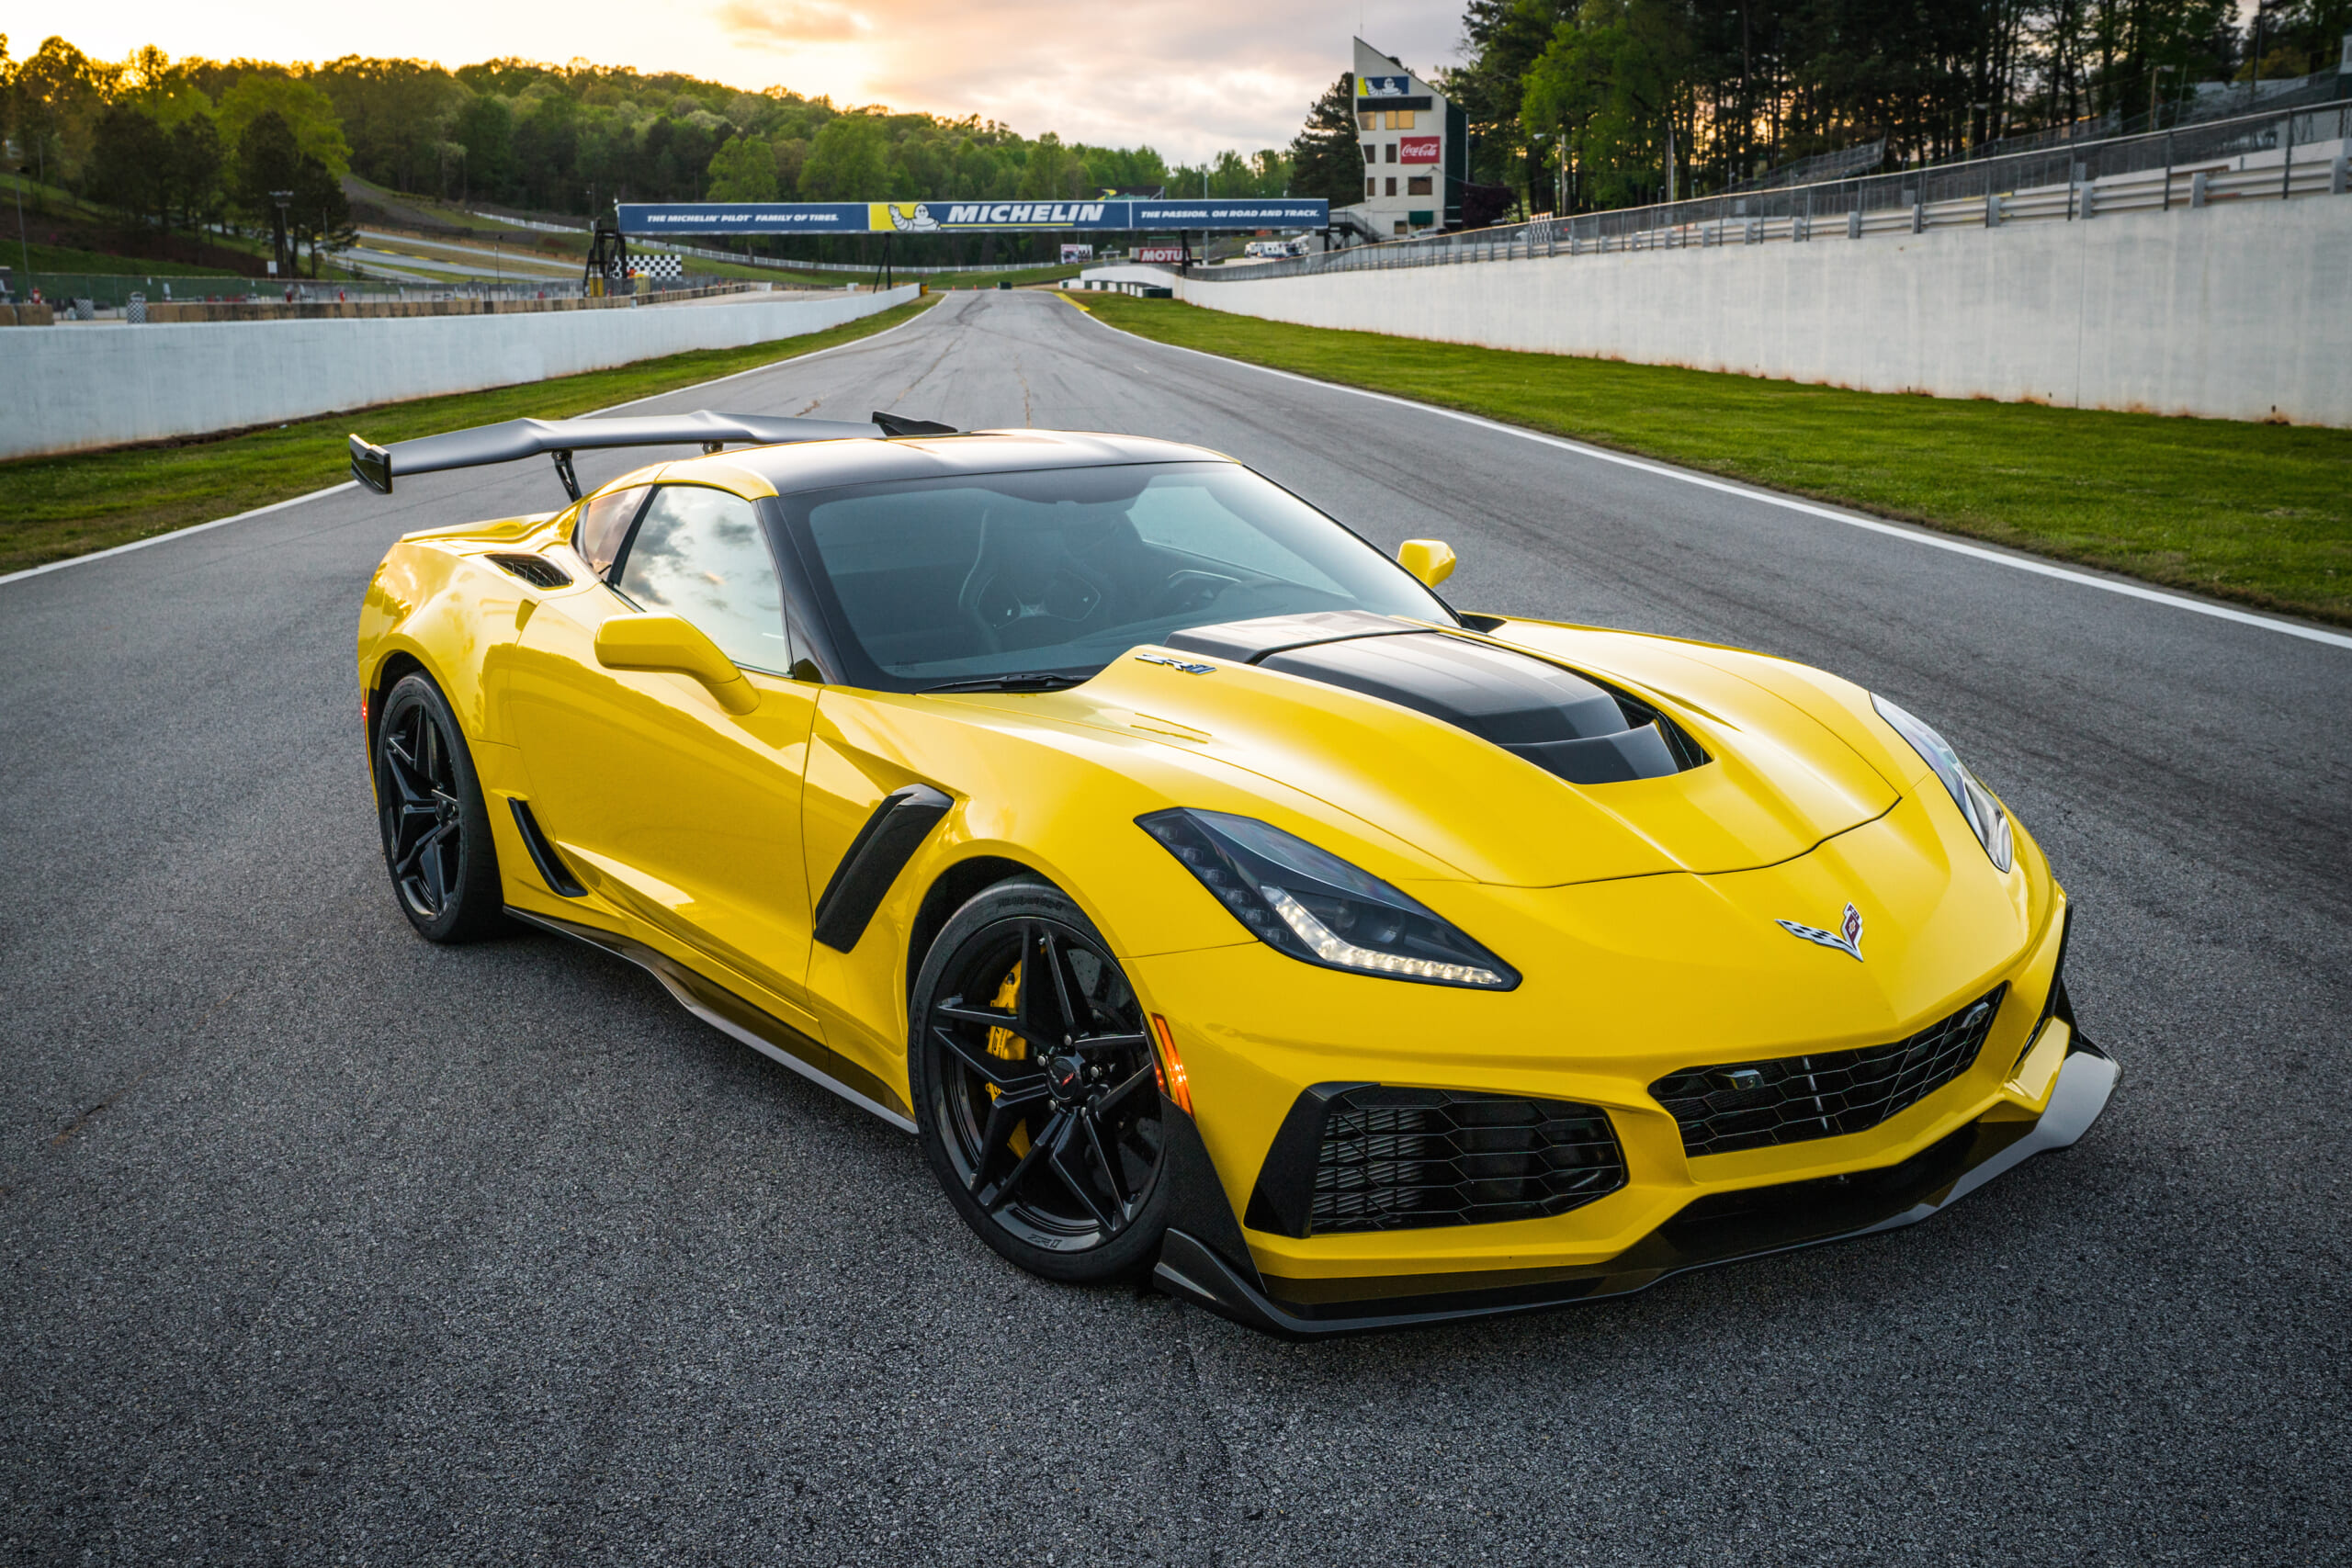 The 212MPH, 755HP Corvette ZR1 Is a StreetLegal, TrackReady Monster